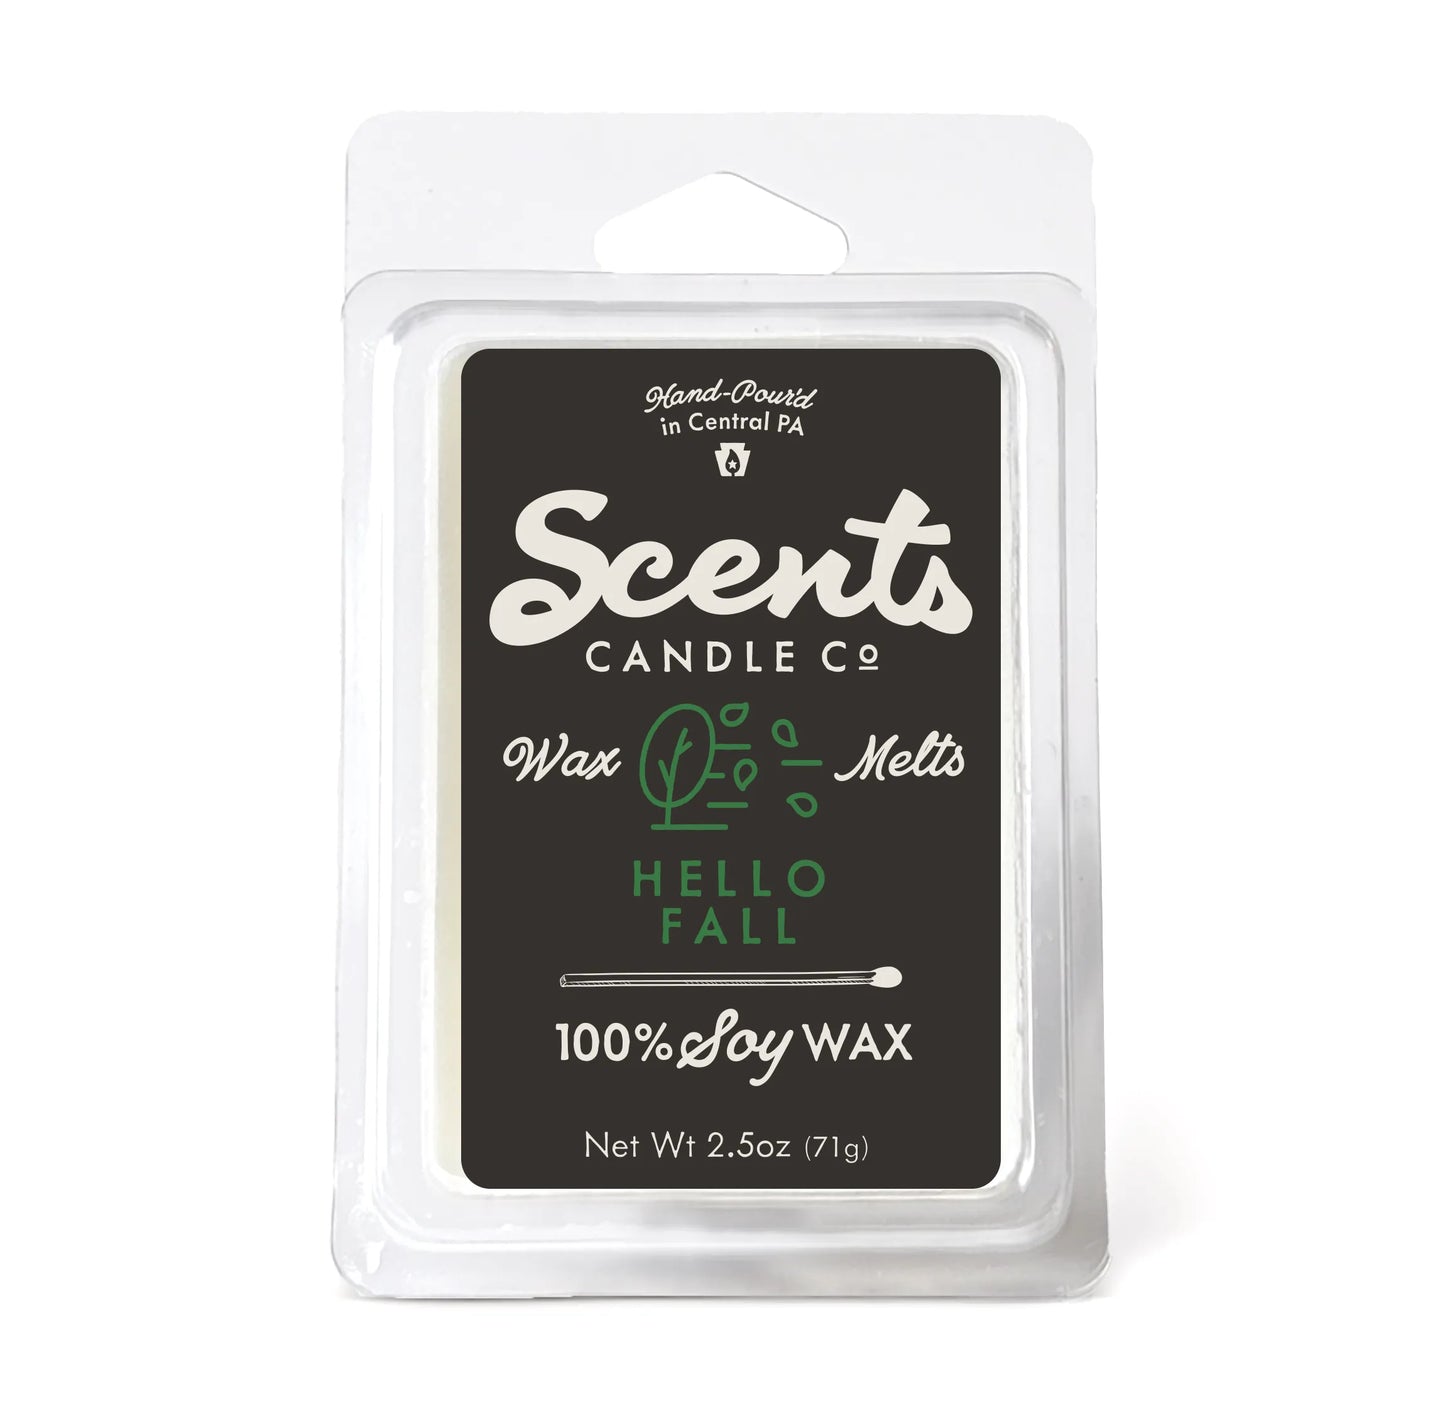 Scents Candle Co. Hello Fall Wax Melt